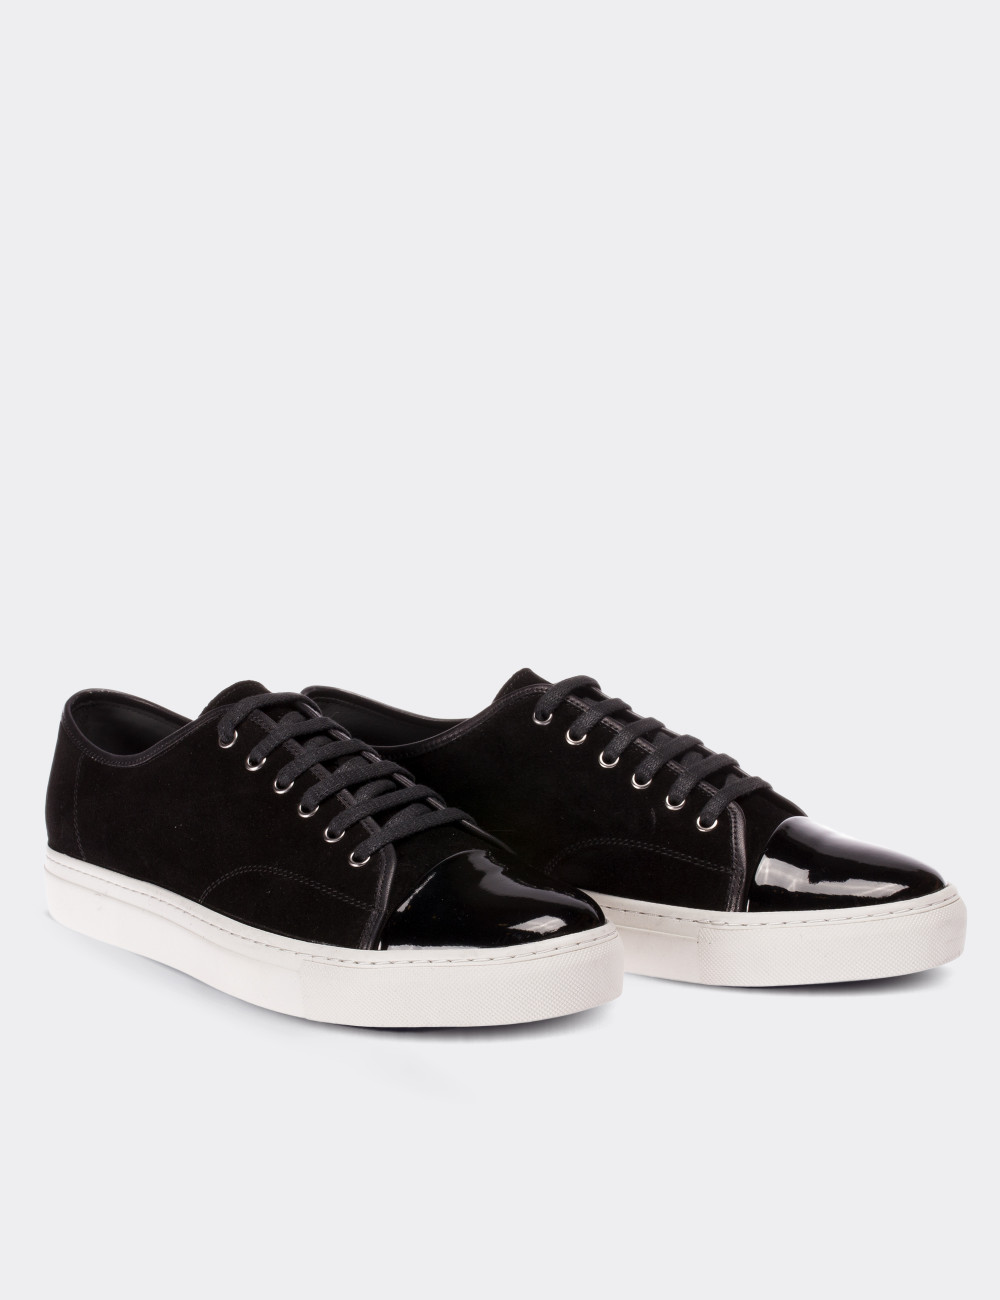 Black Suede Leather Sneakers - 01683MSYHC02